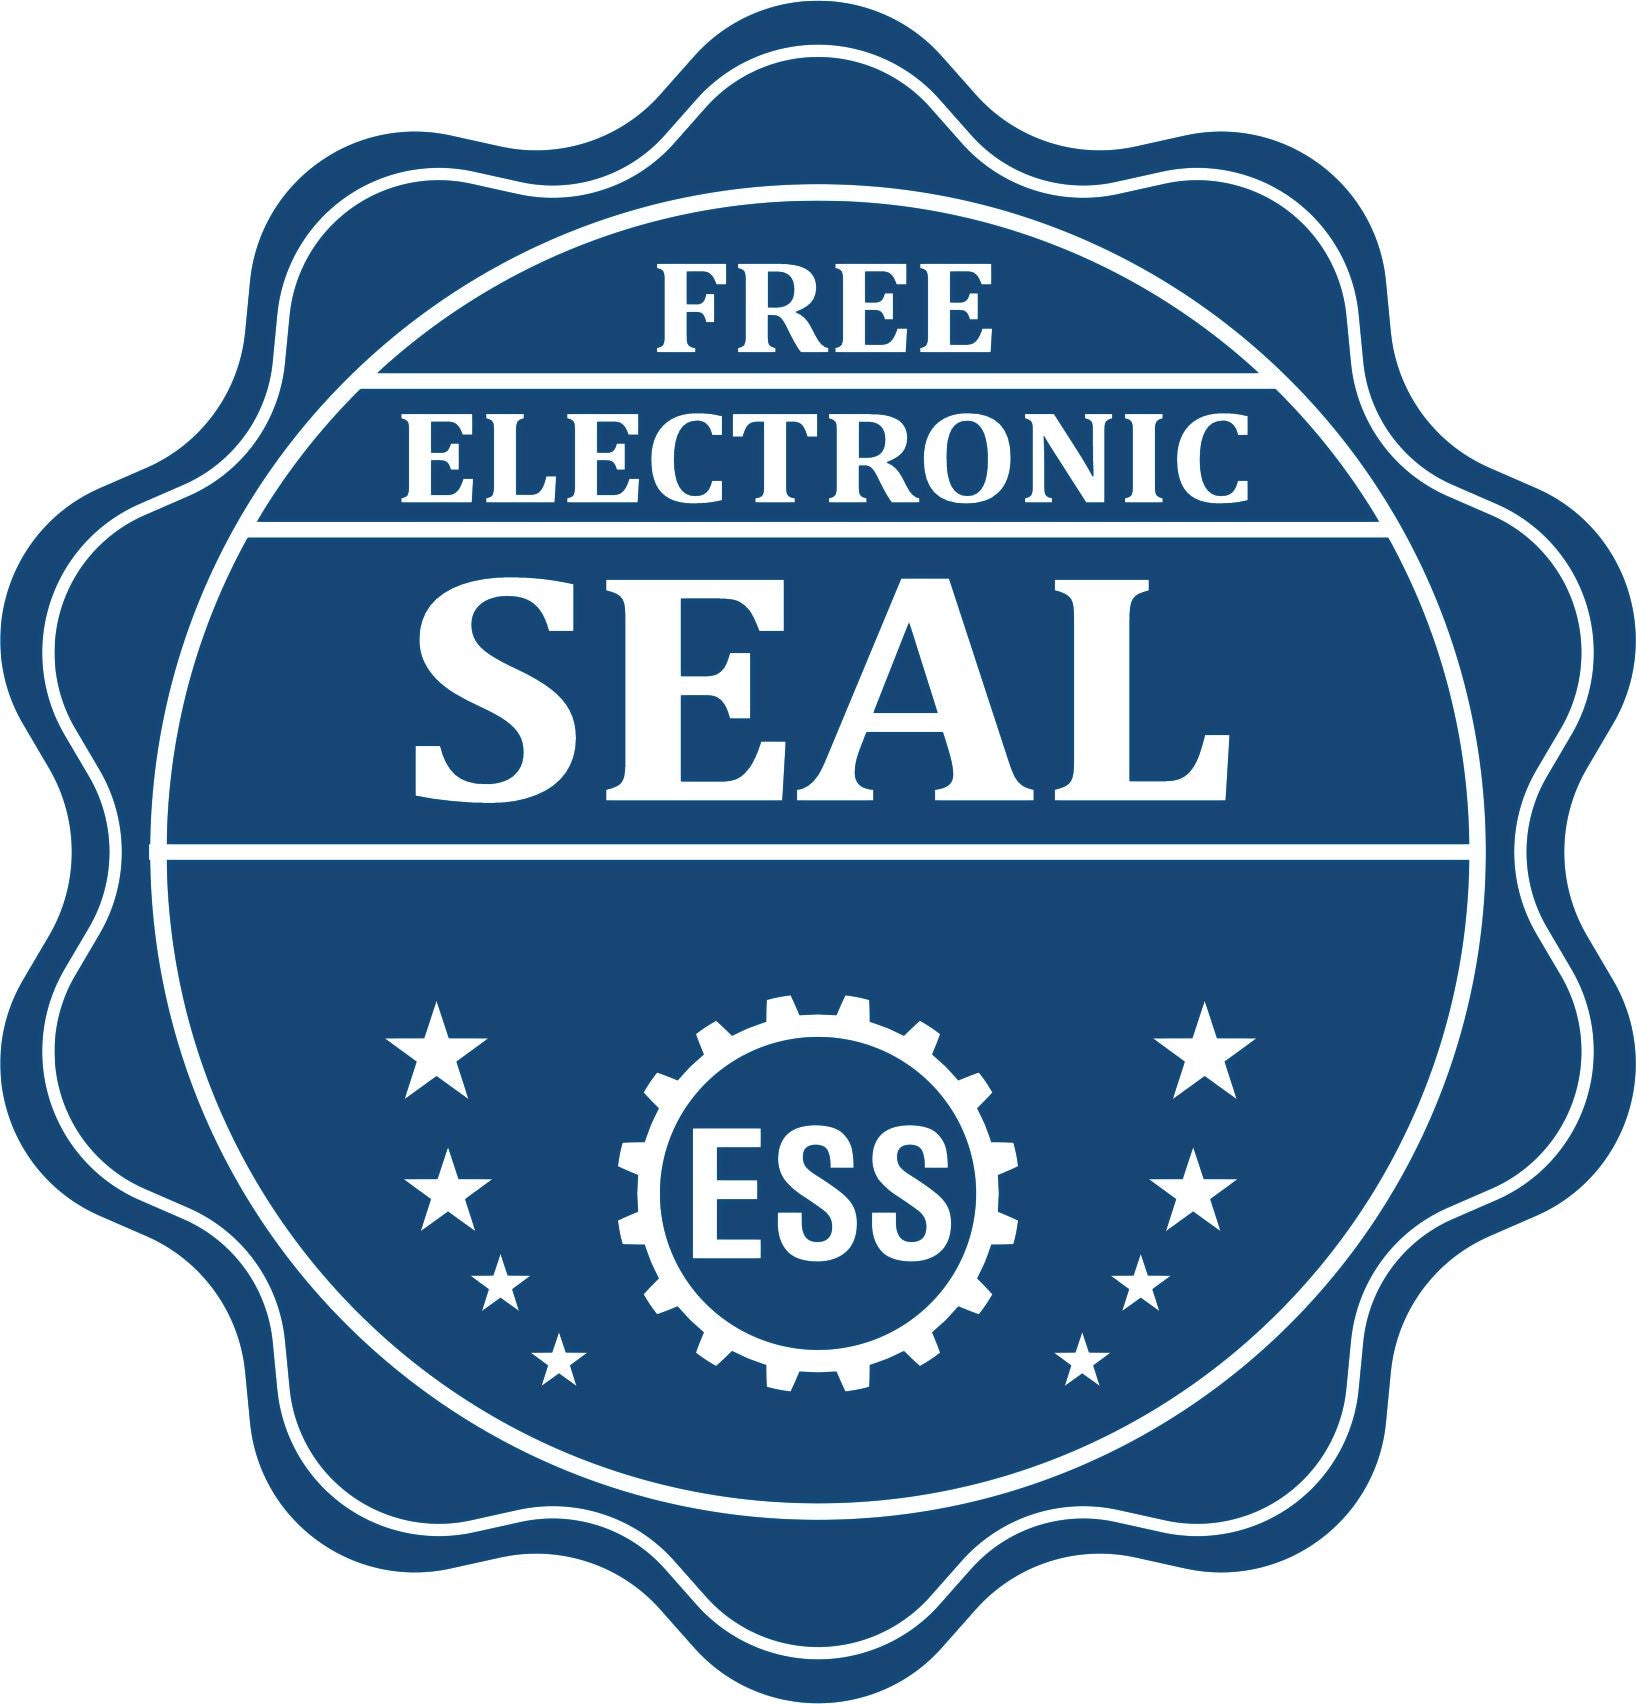 A badge showing a free electronic seal for the Arkansas Desk Architect Embossing Seal with stars and the ESS gear on the emblem.